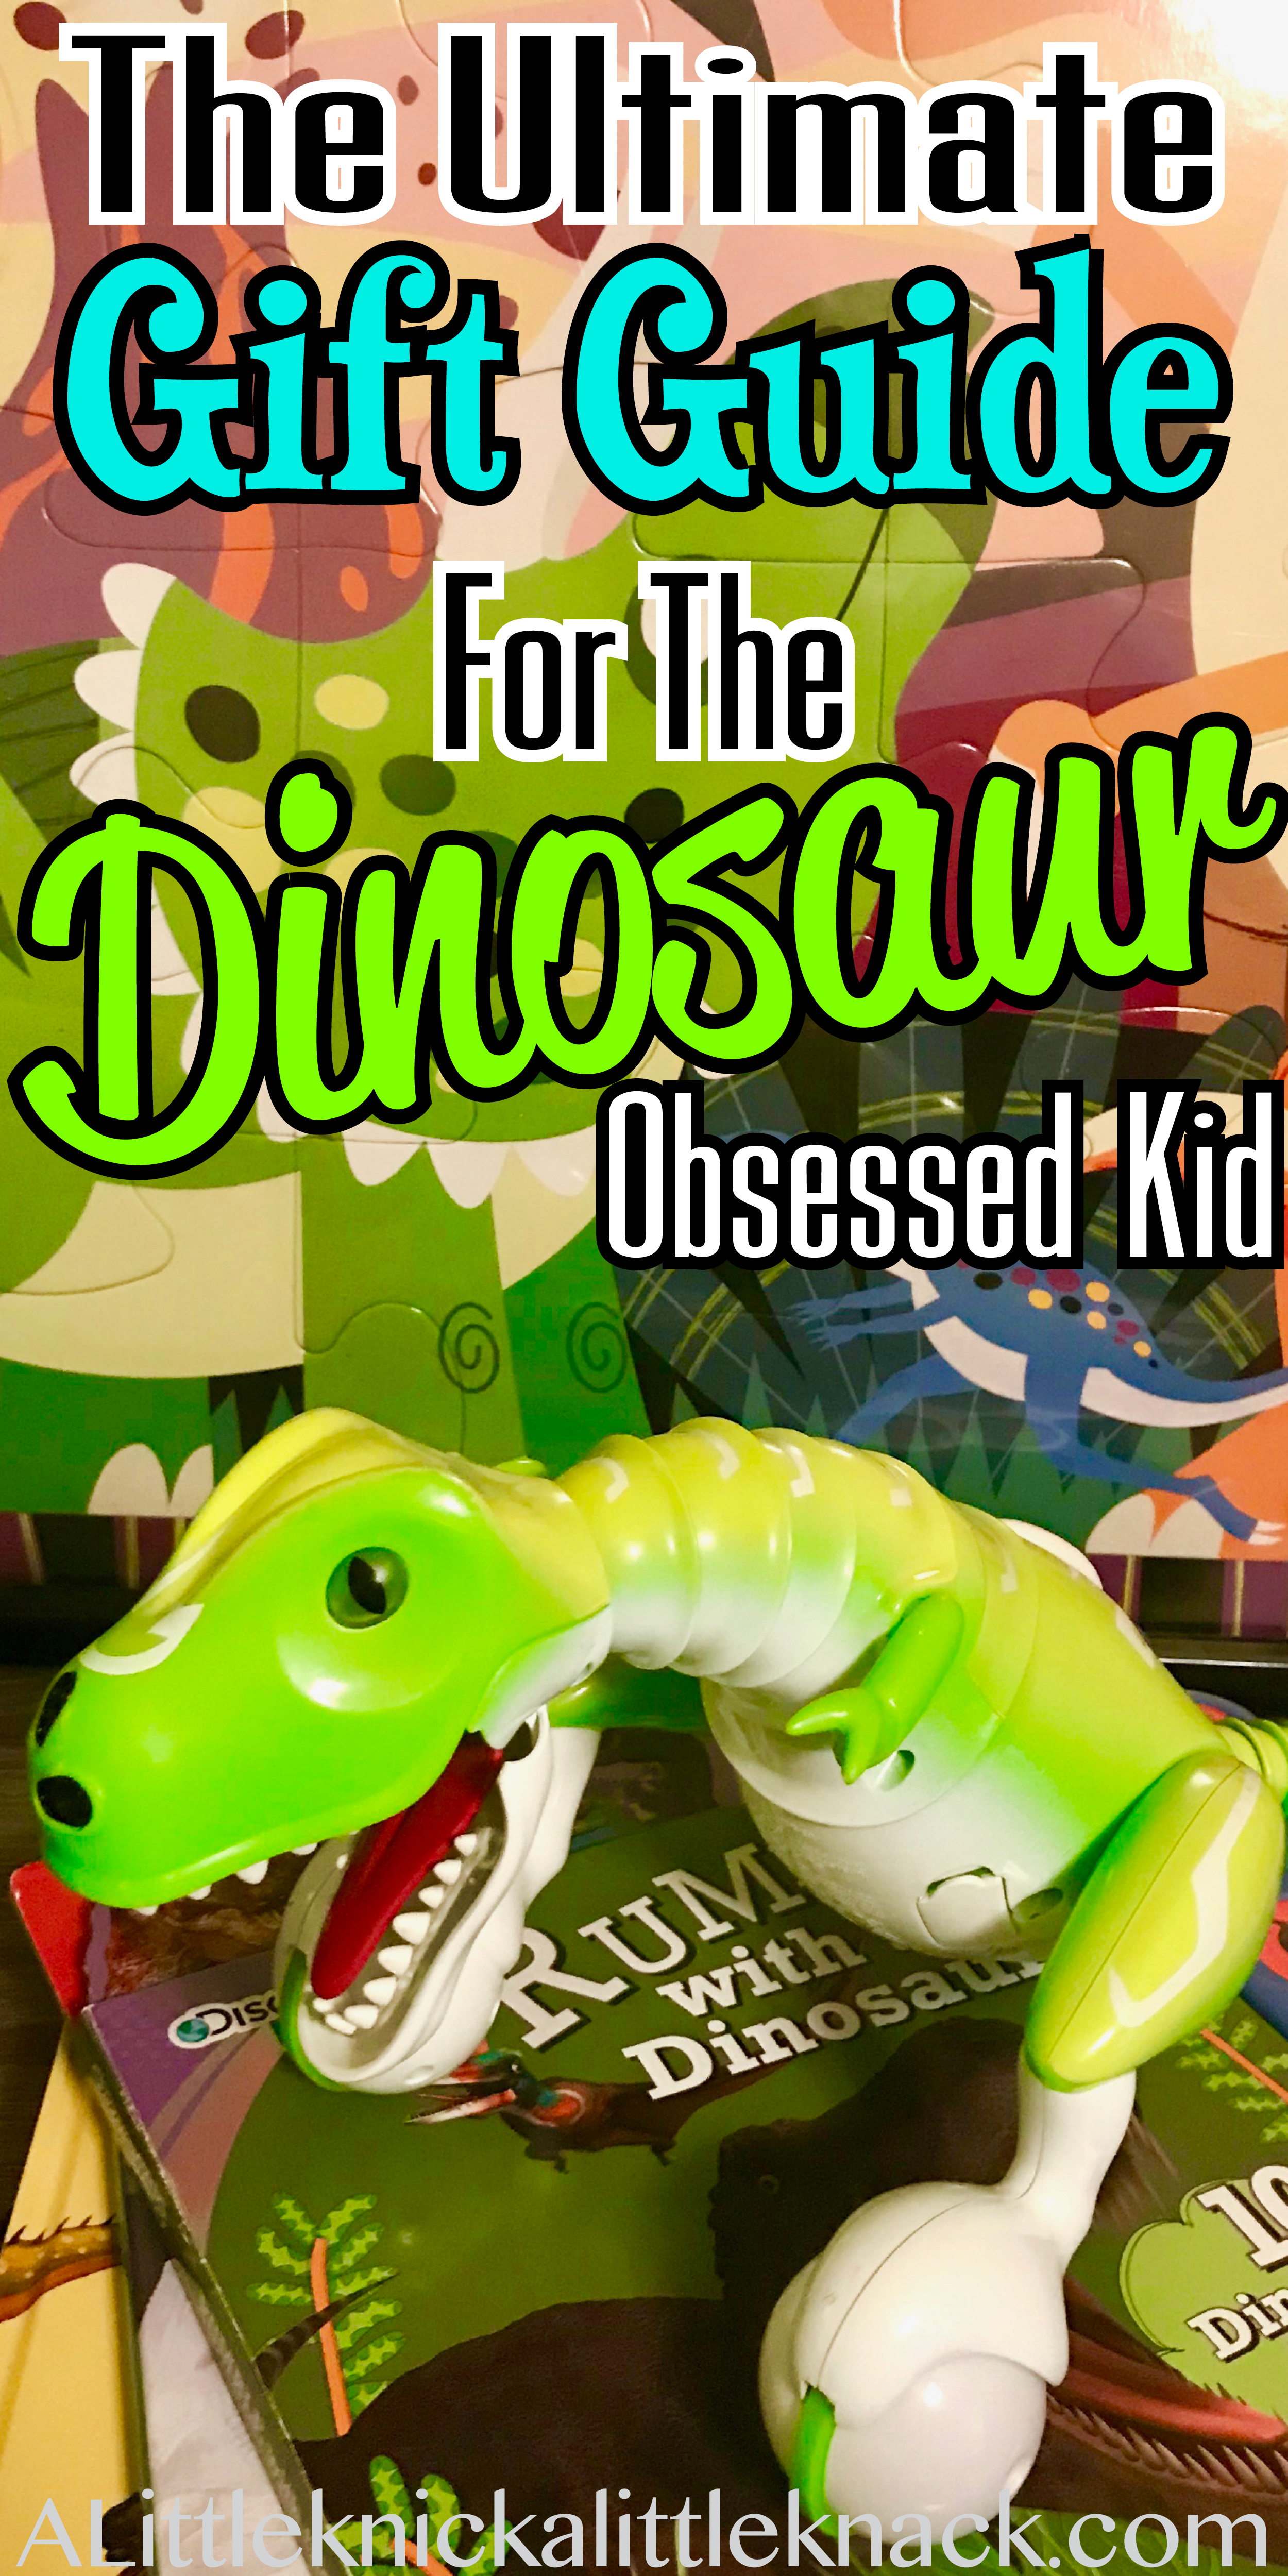 From dinosaur toys to must watch dinosaur movies this ultimate dino gift guide has it all! #dino